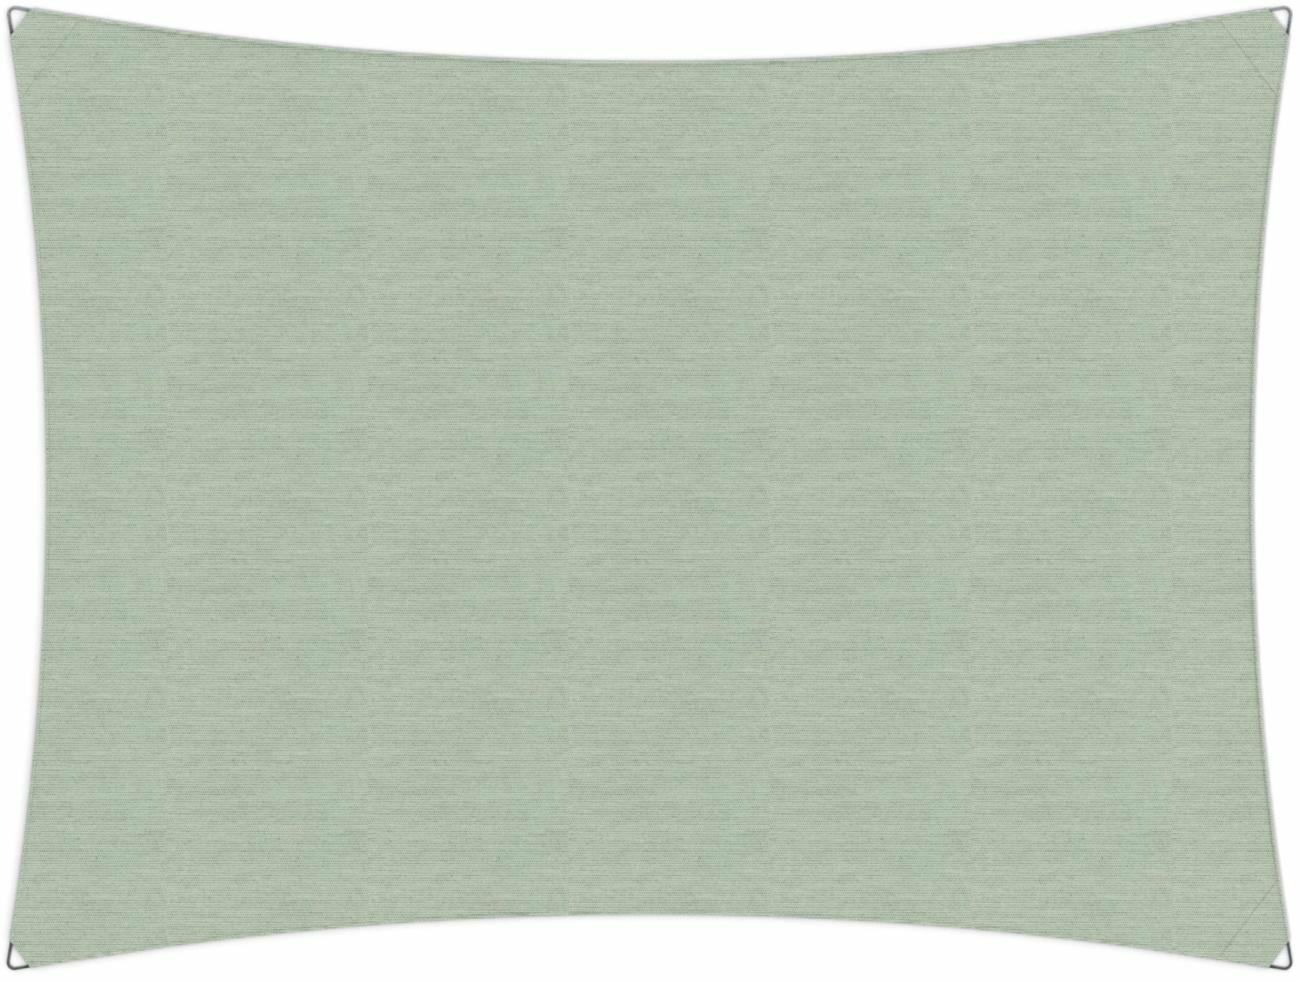 Ingenua shade sail Rectangle 5 x 4 m, for outdoor use. Colour of the fabric shade sail Mint.